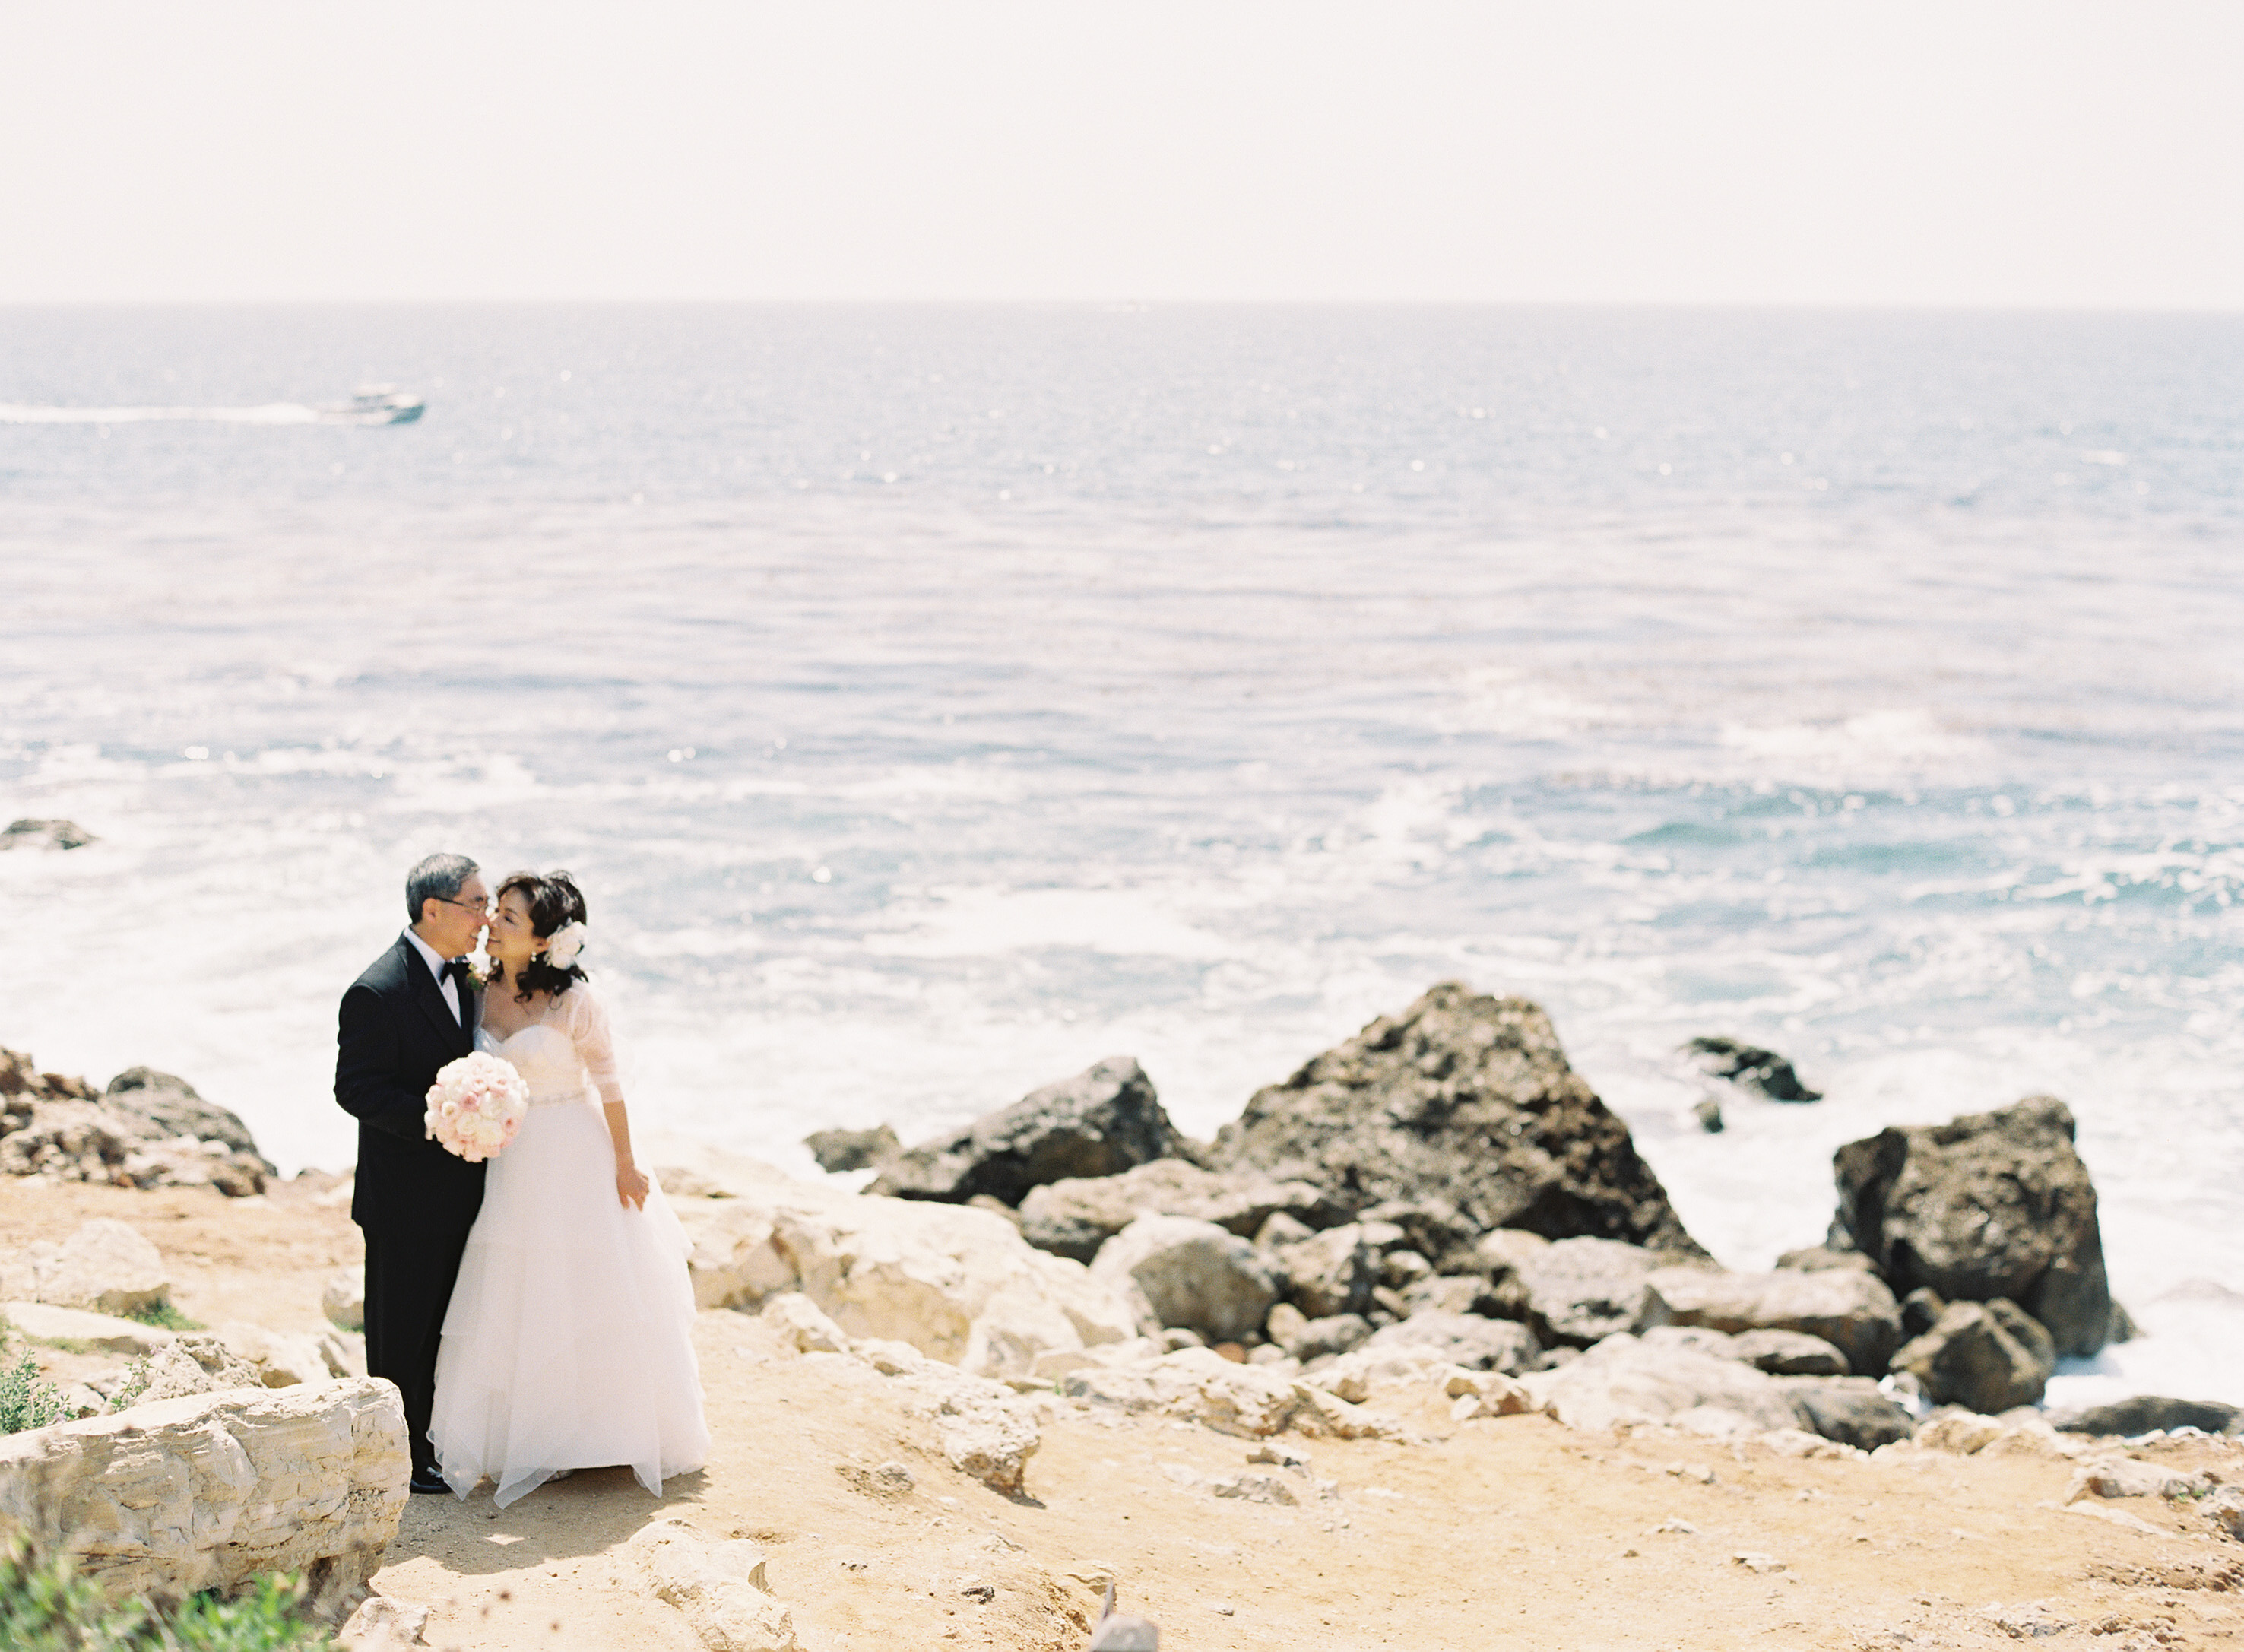 Bride and groom standing on the bluffs with the ocean in the background
